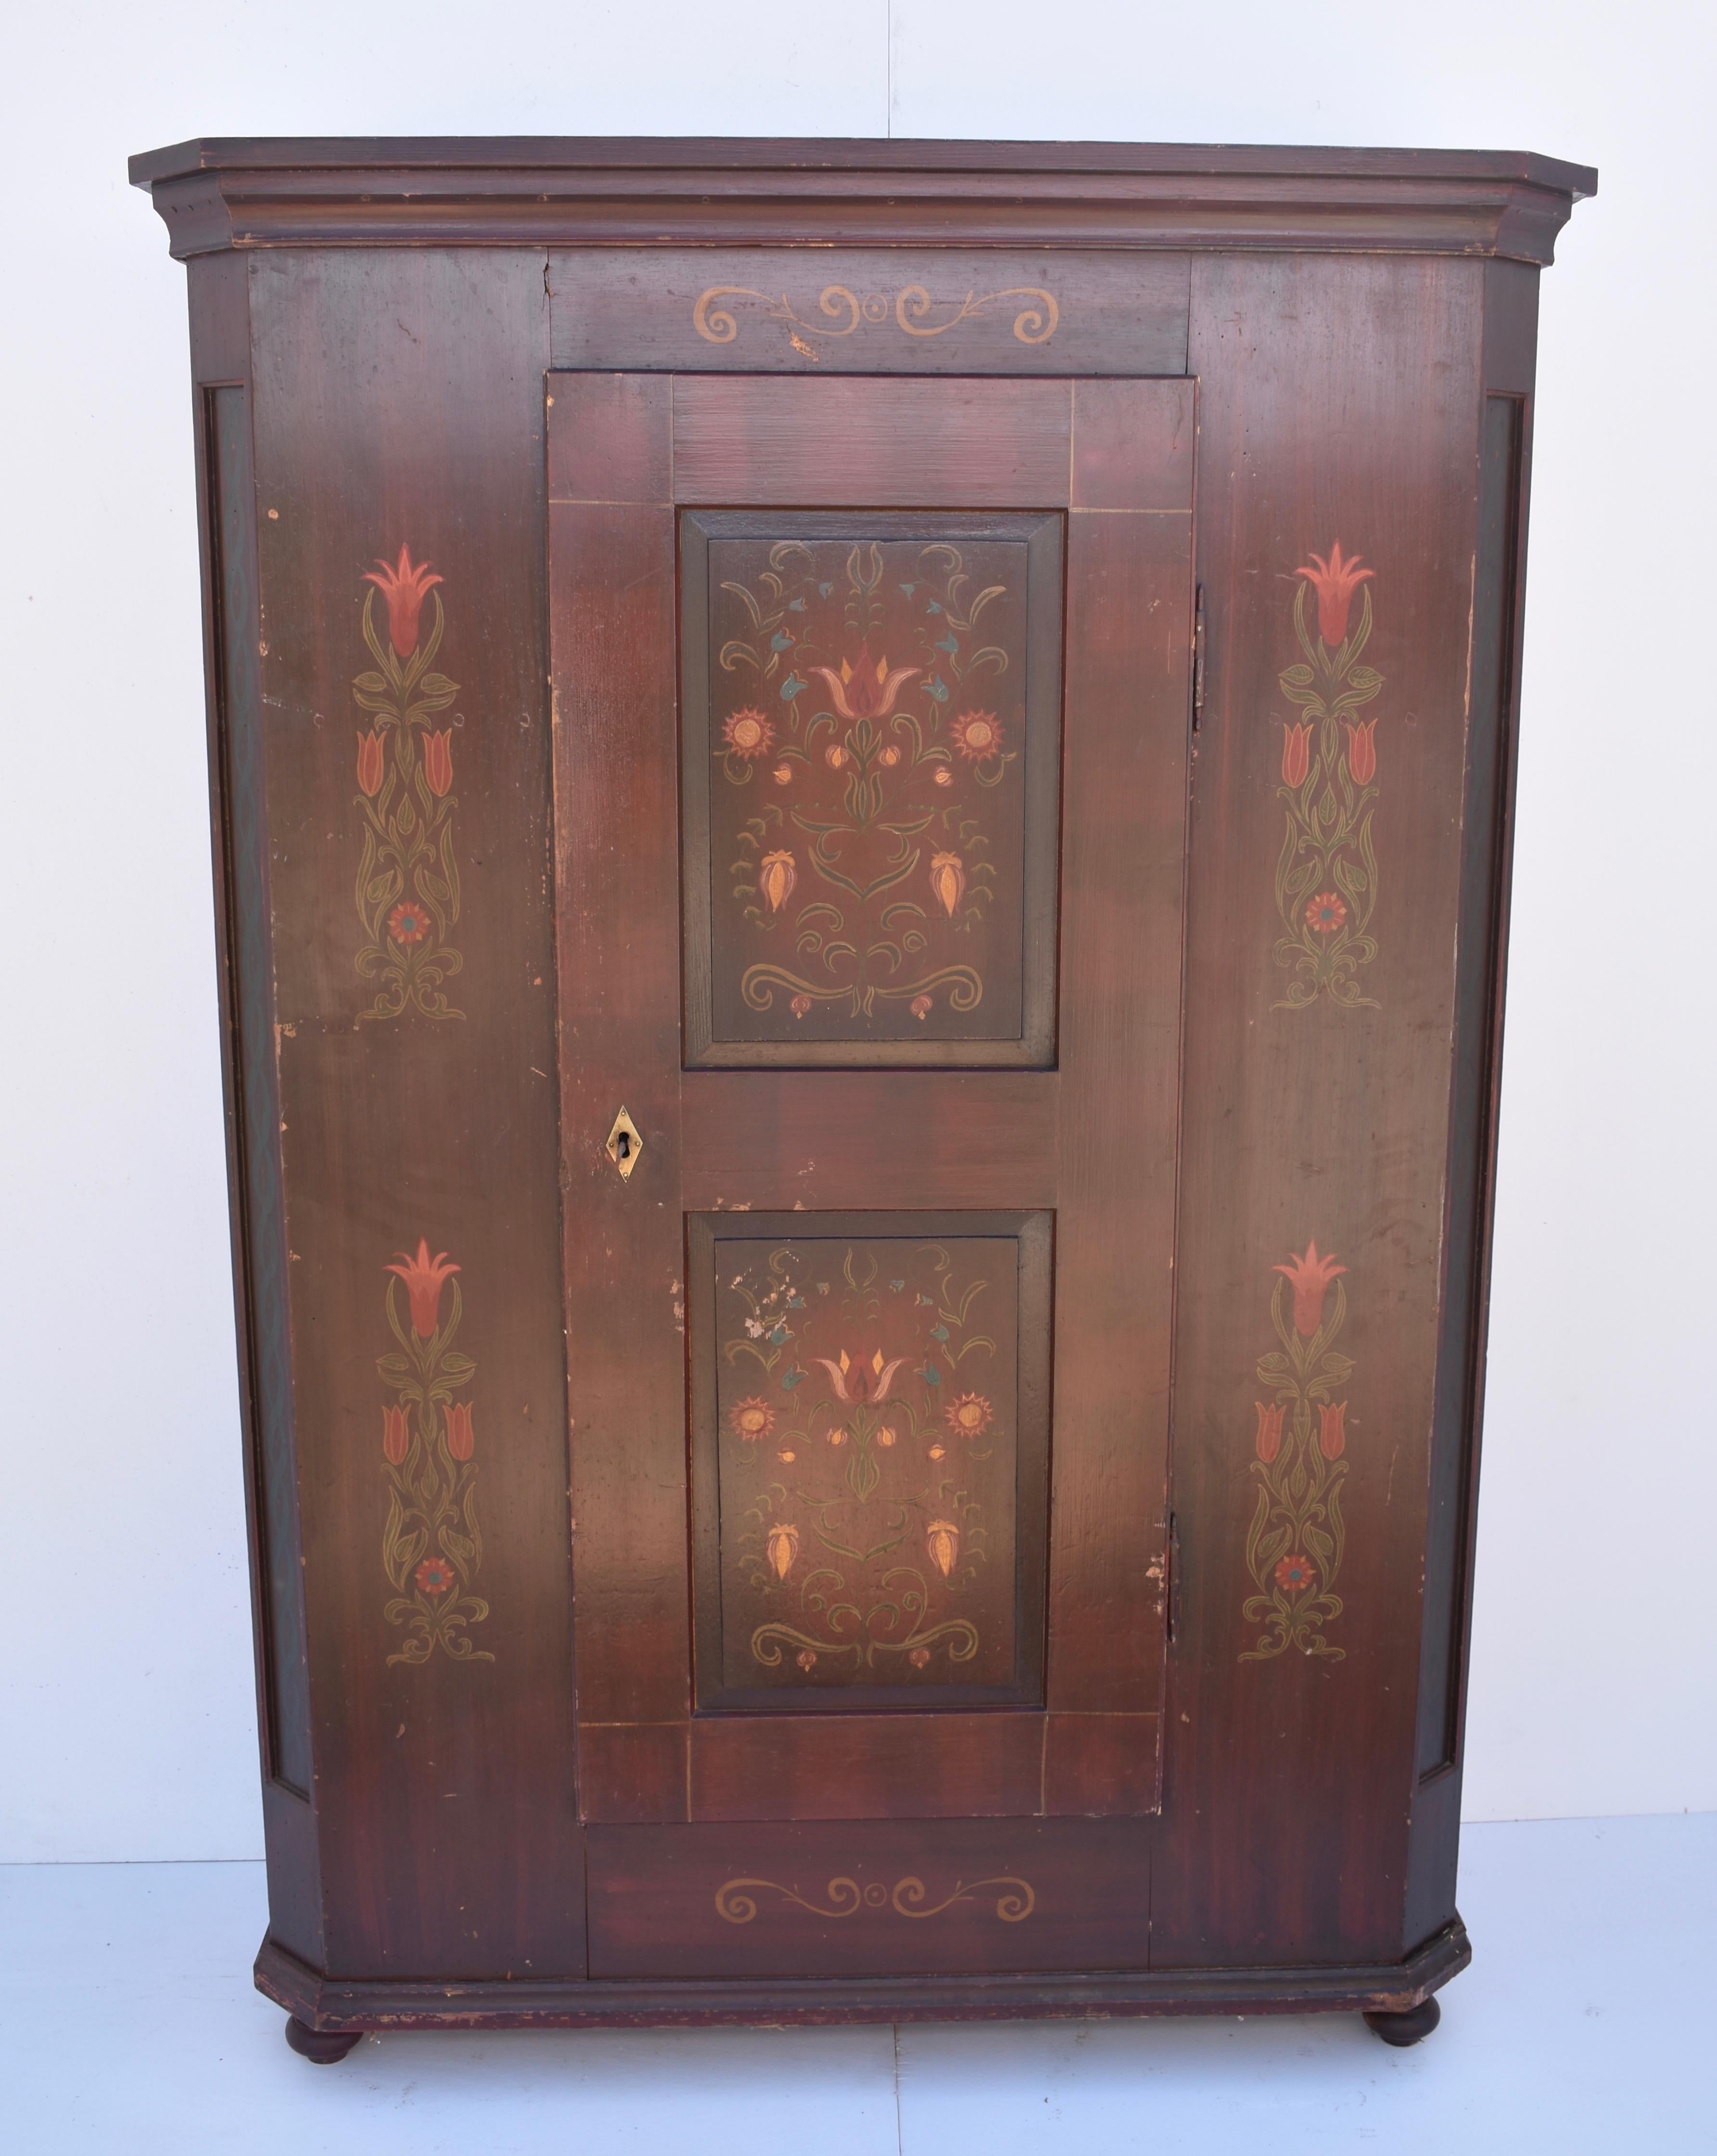 This well-built Baroque-style wardrobe has a bold, nicely-formed crown, a single door with two raised panels, which opens 180 degrees on fiche hinges, and unusual decorated panels on the chamfered front corners. The whole piece is decorated with